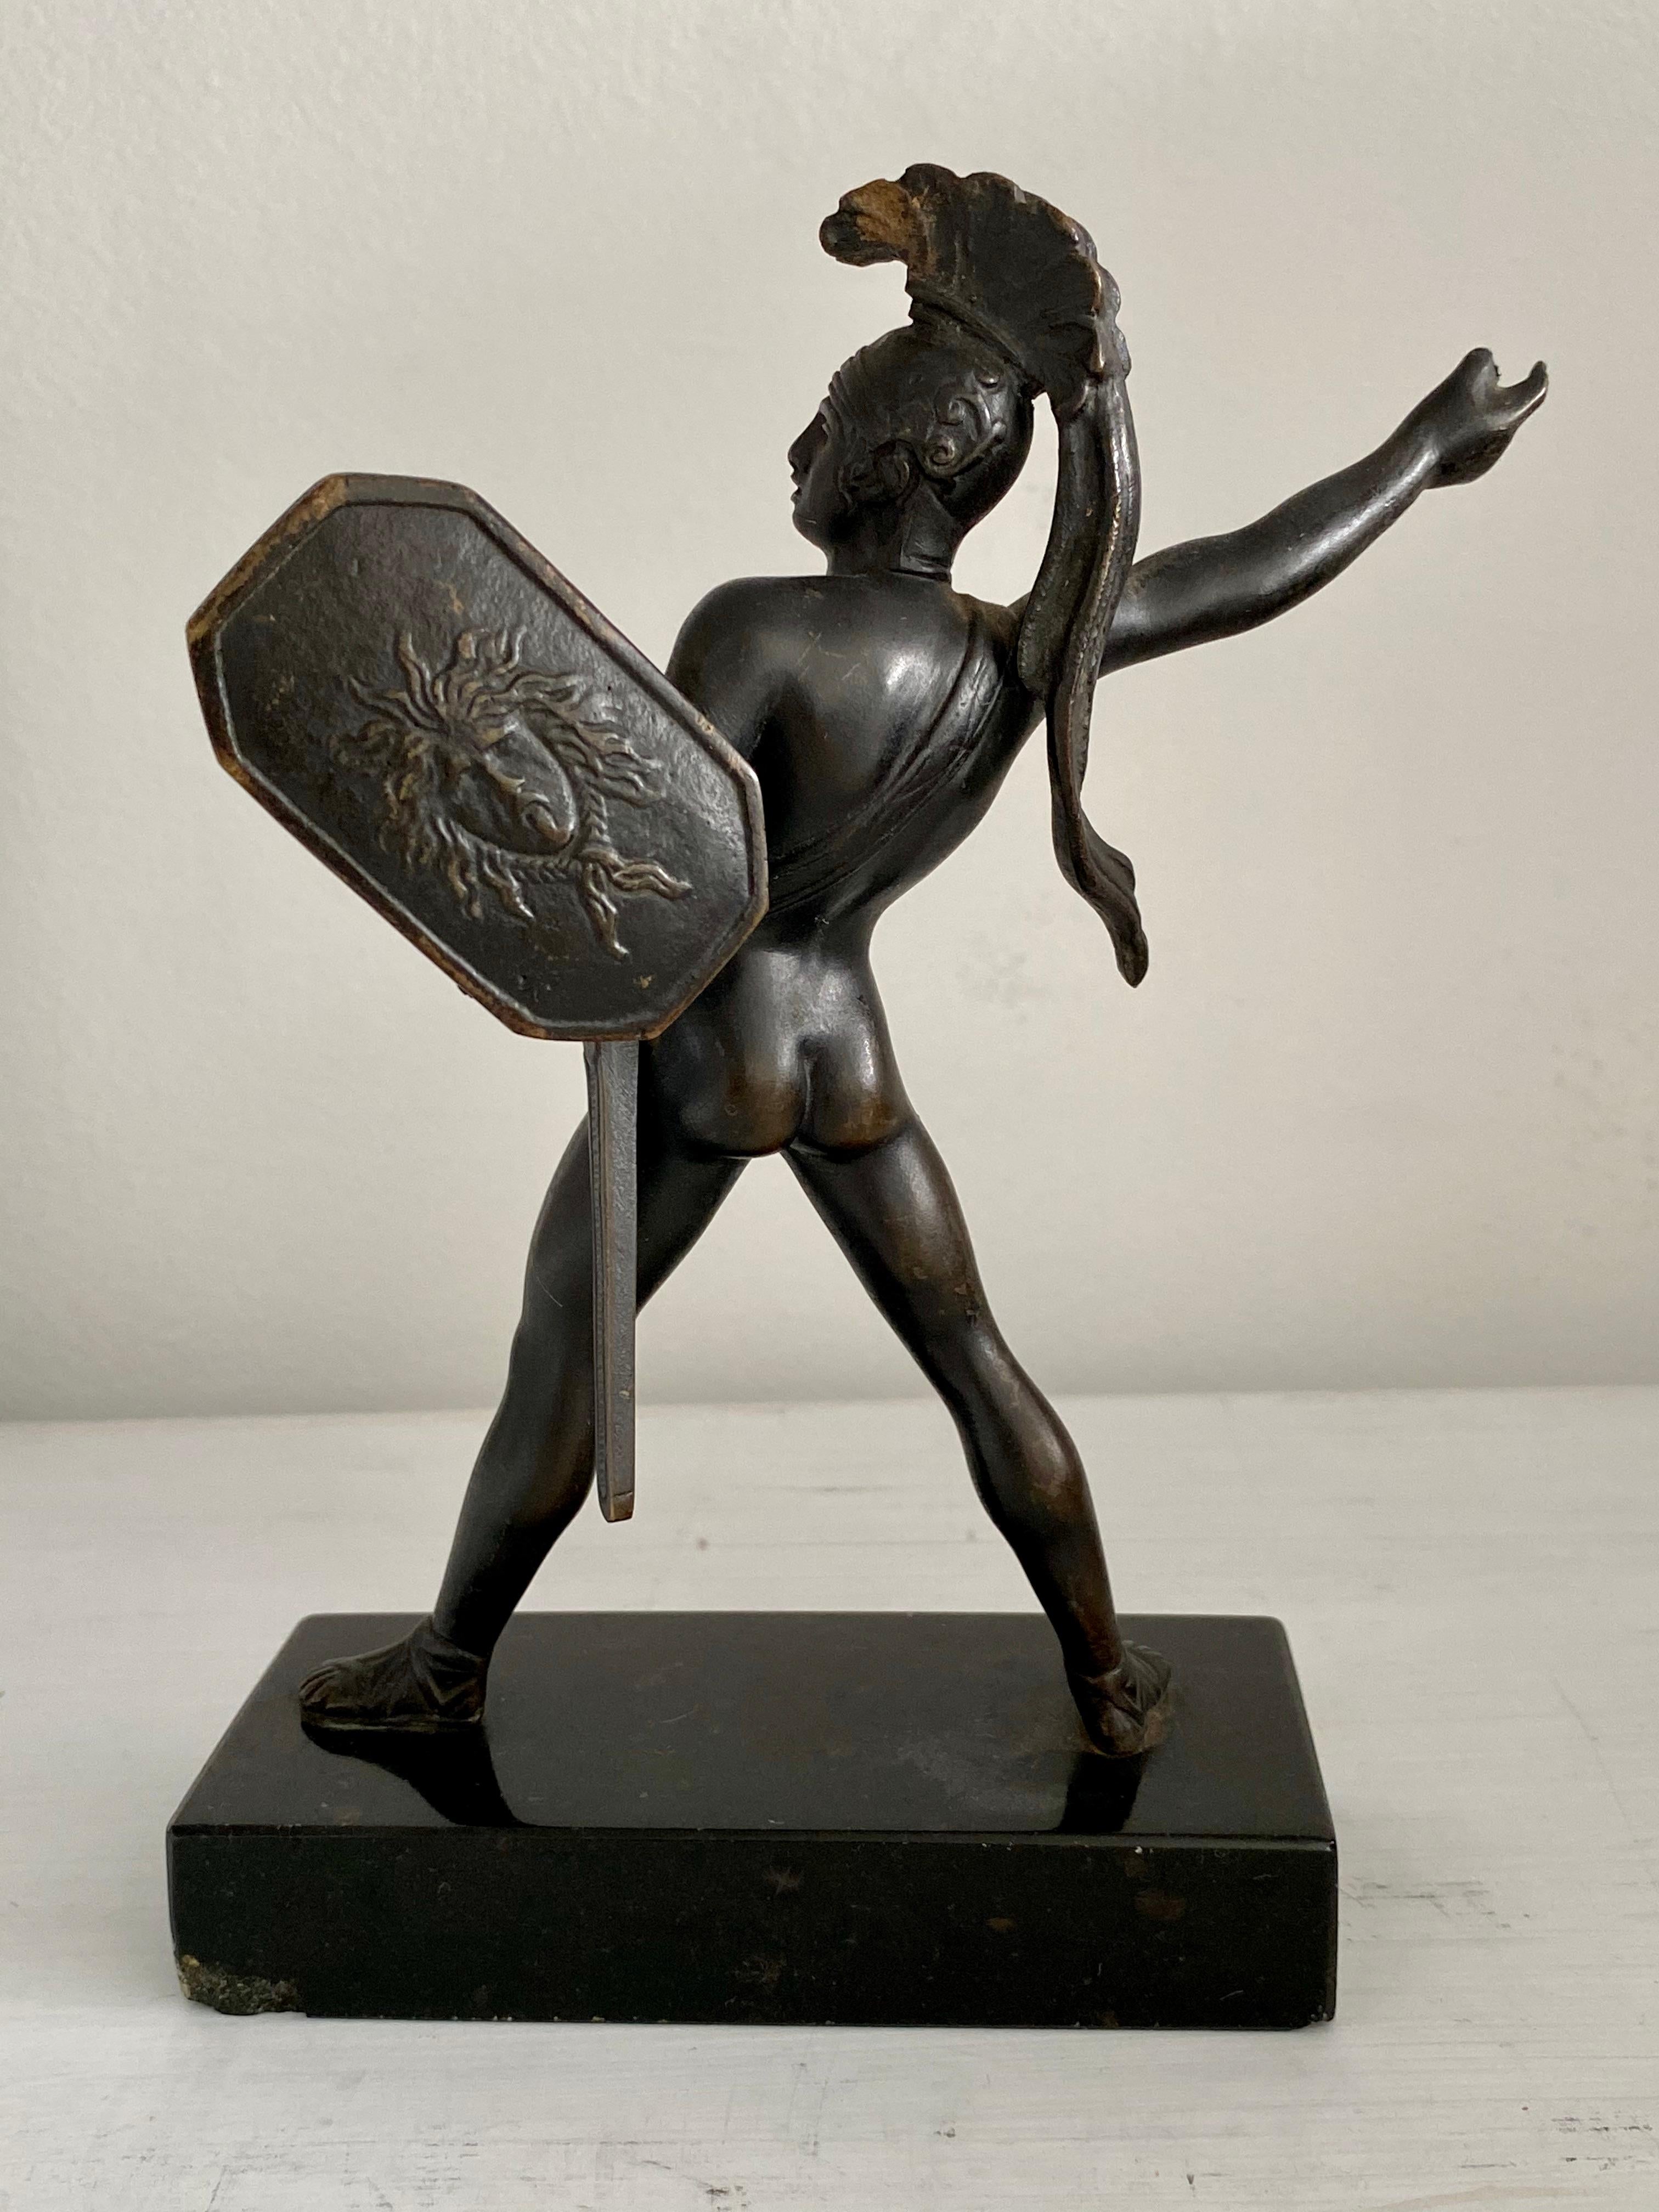 This well modeled and cast neoclassical French bronze from the 19th century recalls a moment in battle of the hero Achilles, a master of hand to hand combat. In this confident pose ready to throw a spear (now missing). Special note is made of the